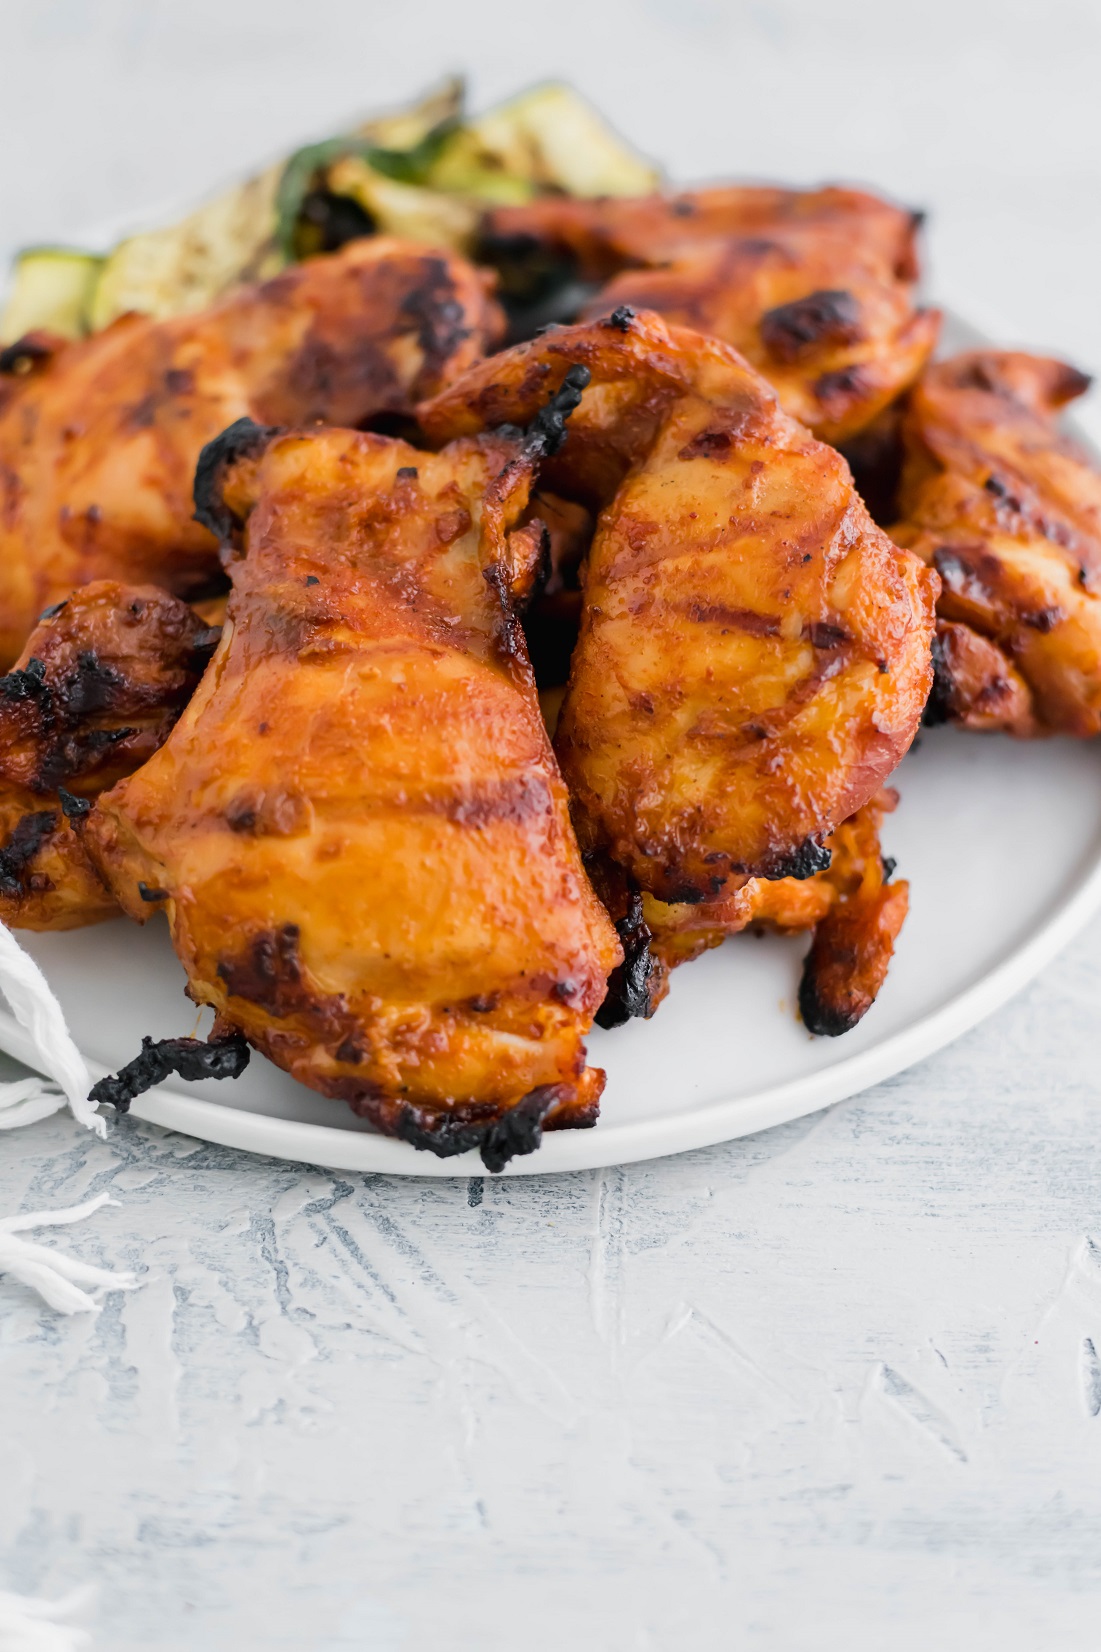 Need to spice up your summer grilling routine?! This spicy chicken marinade is super flavorful and simple to make. Perfect for grilling season!